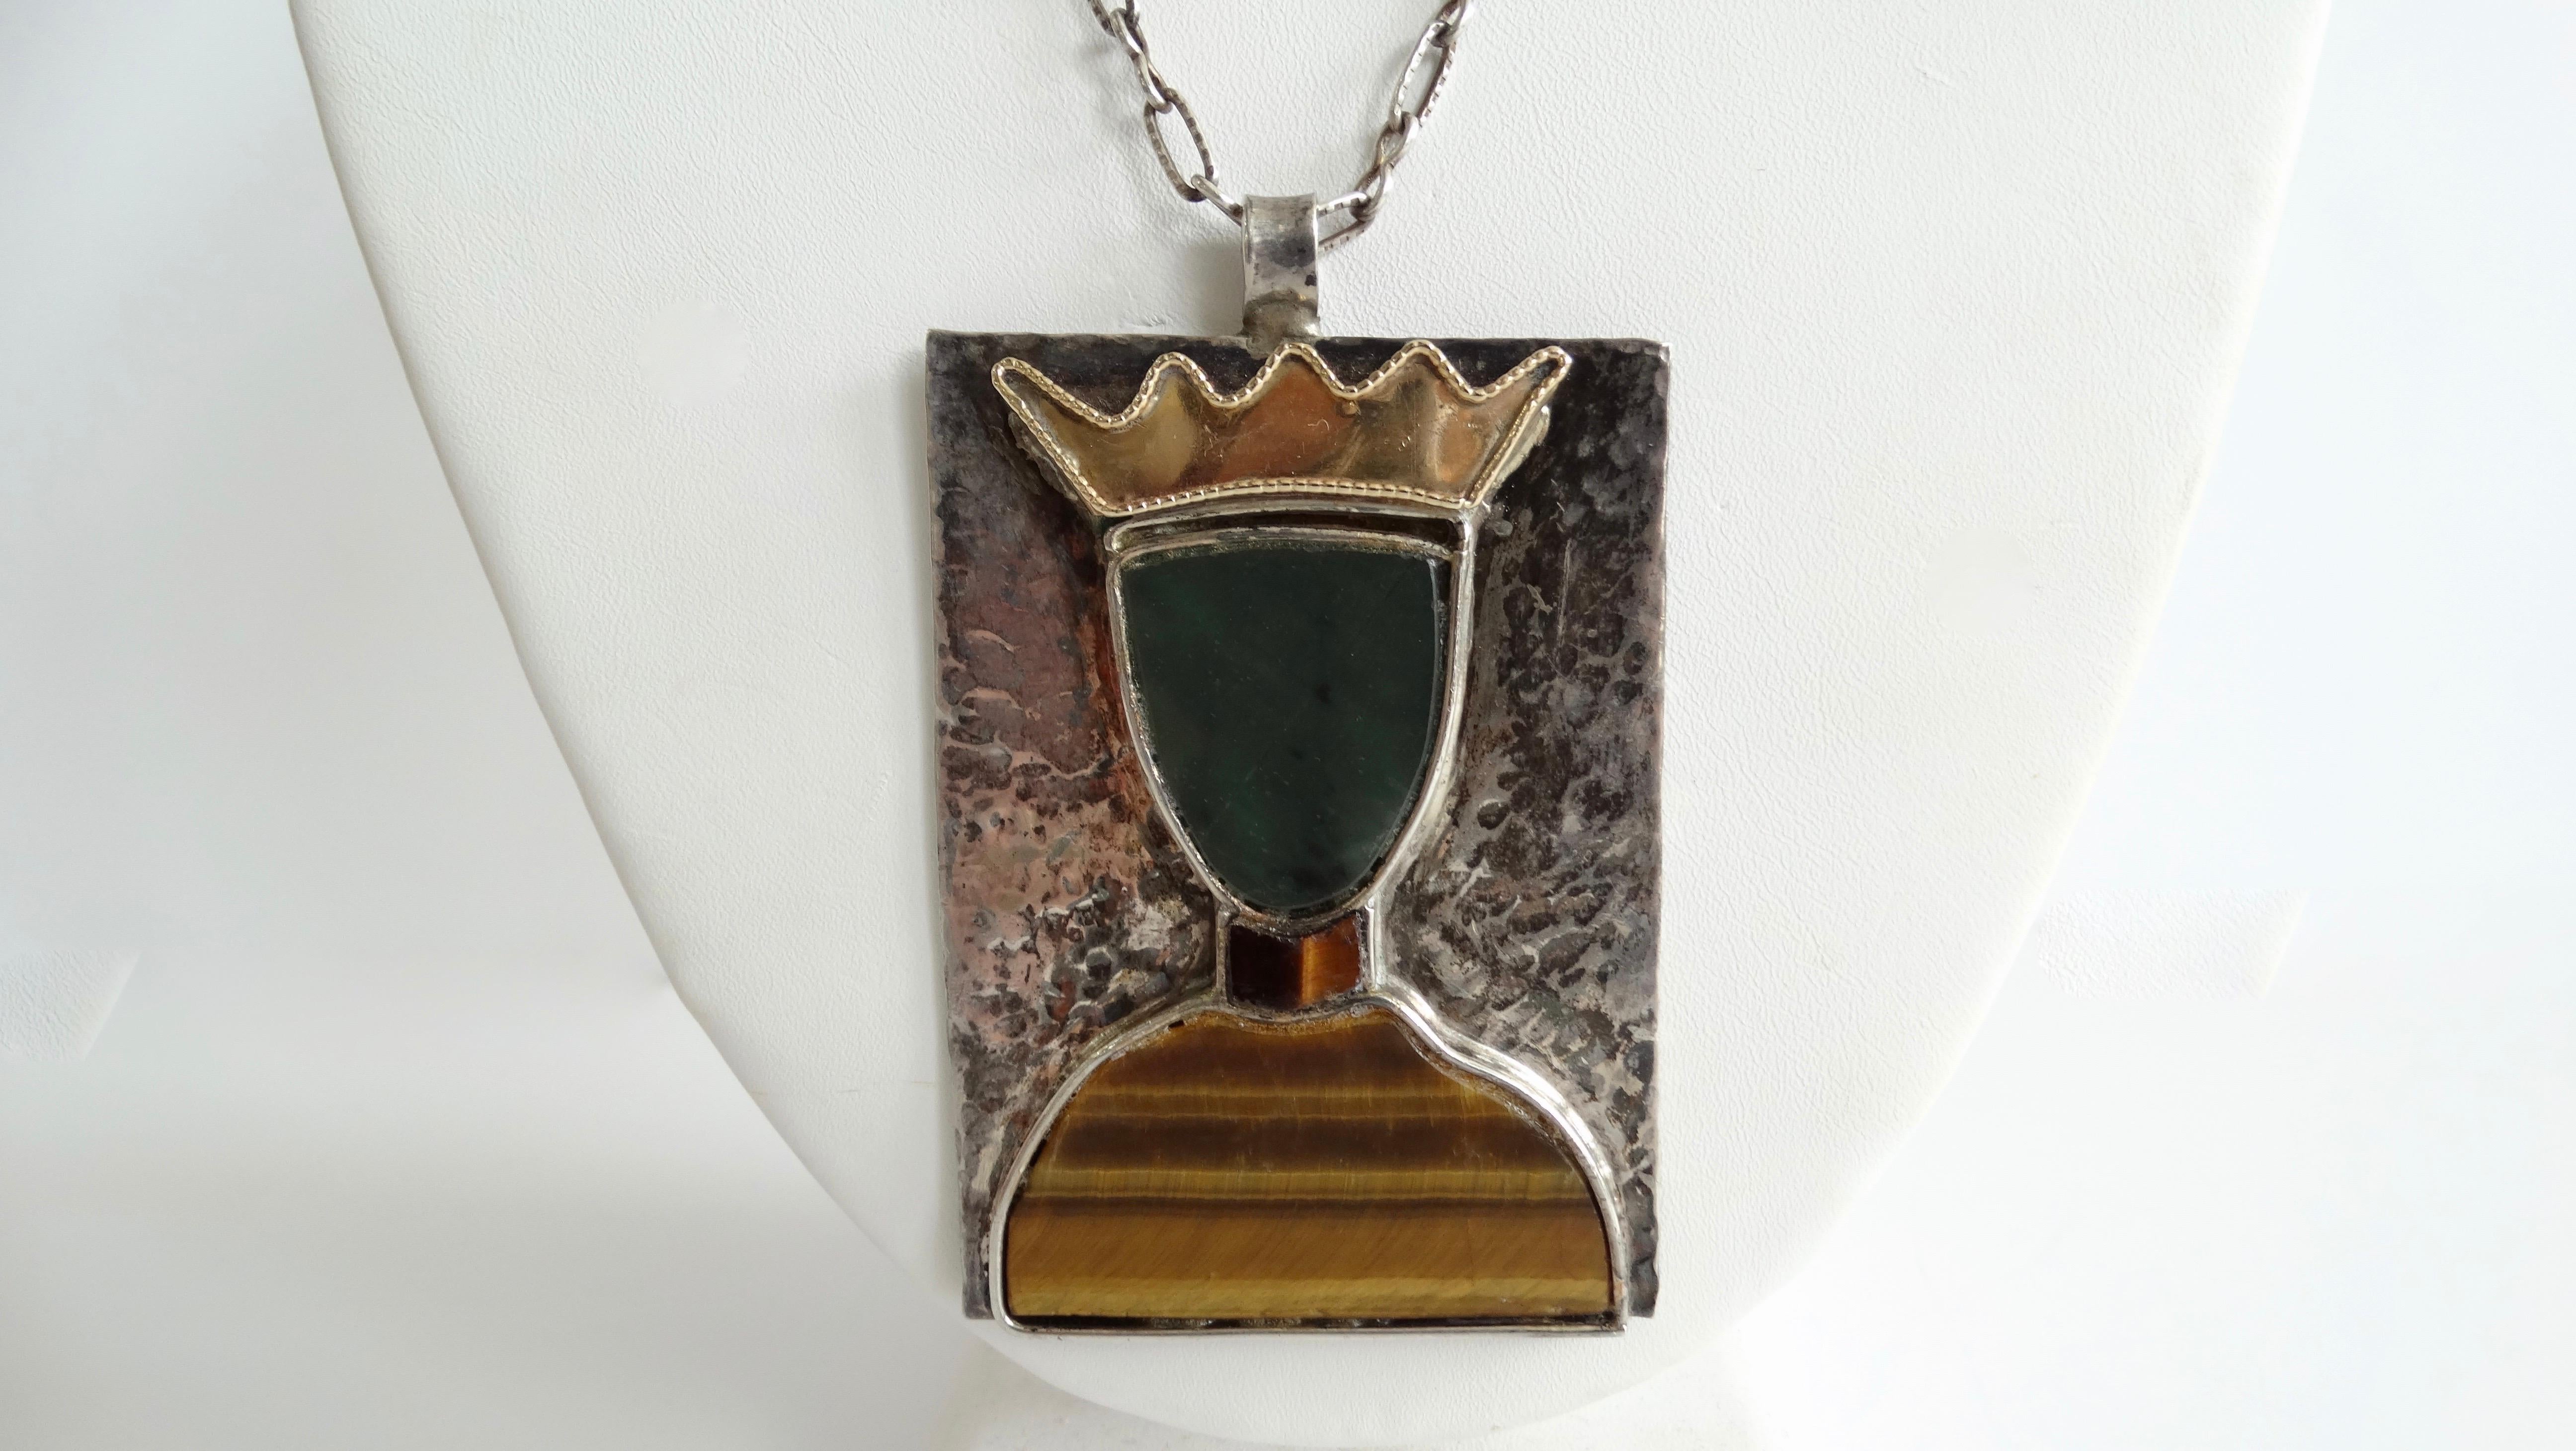 Score yourself a piece of true vintage with this William de Lillo necklace! Circa 1970s, this necklace features a pendant made of textured sterling silver with the silhouette of a queen. The queen is made up of 18k gold, tigers eye and jade. The